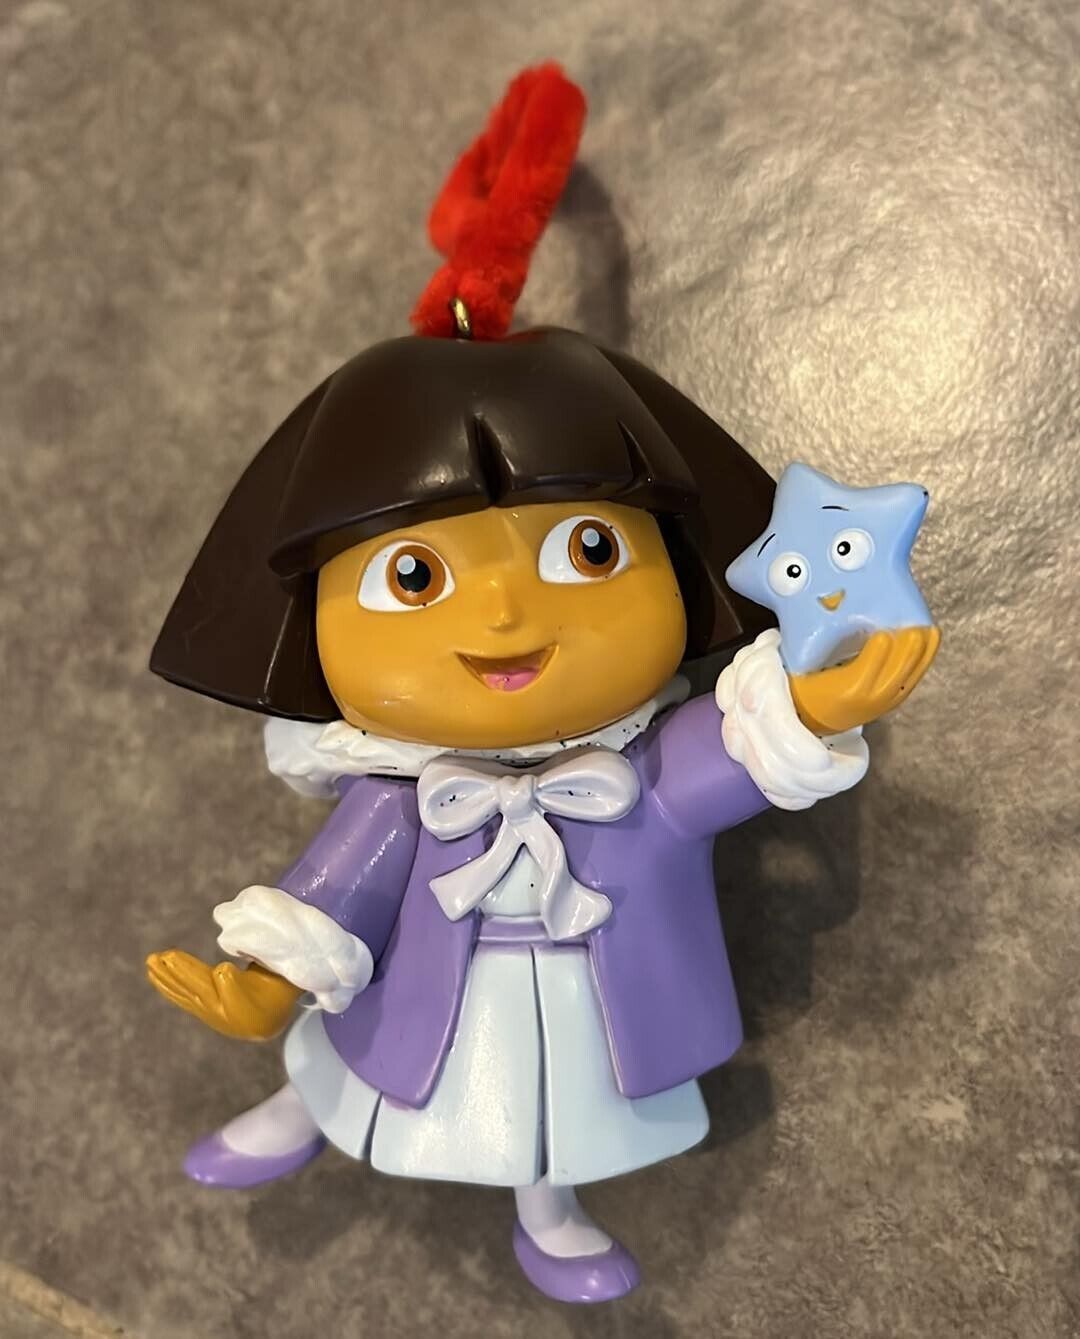 Vintage Nickelodeon's Dora The Explorer Ornament From American Greetings